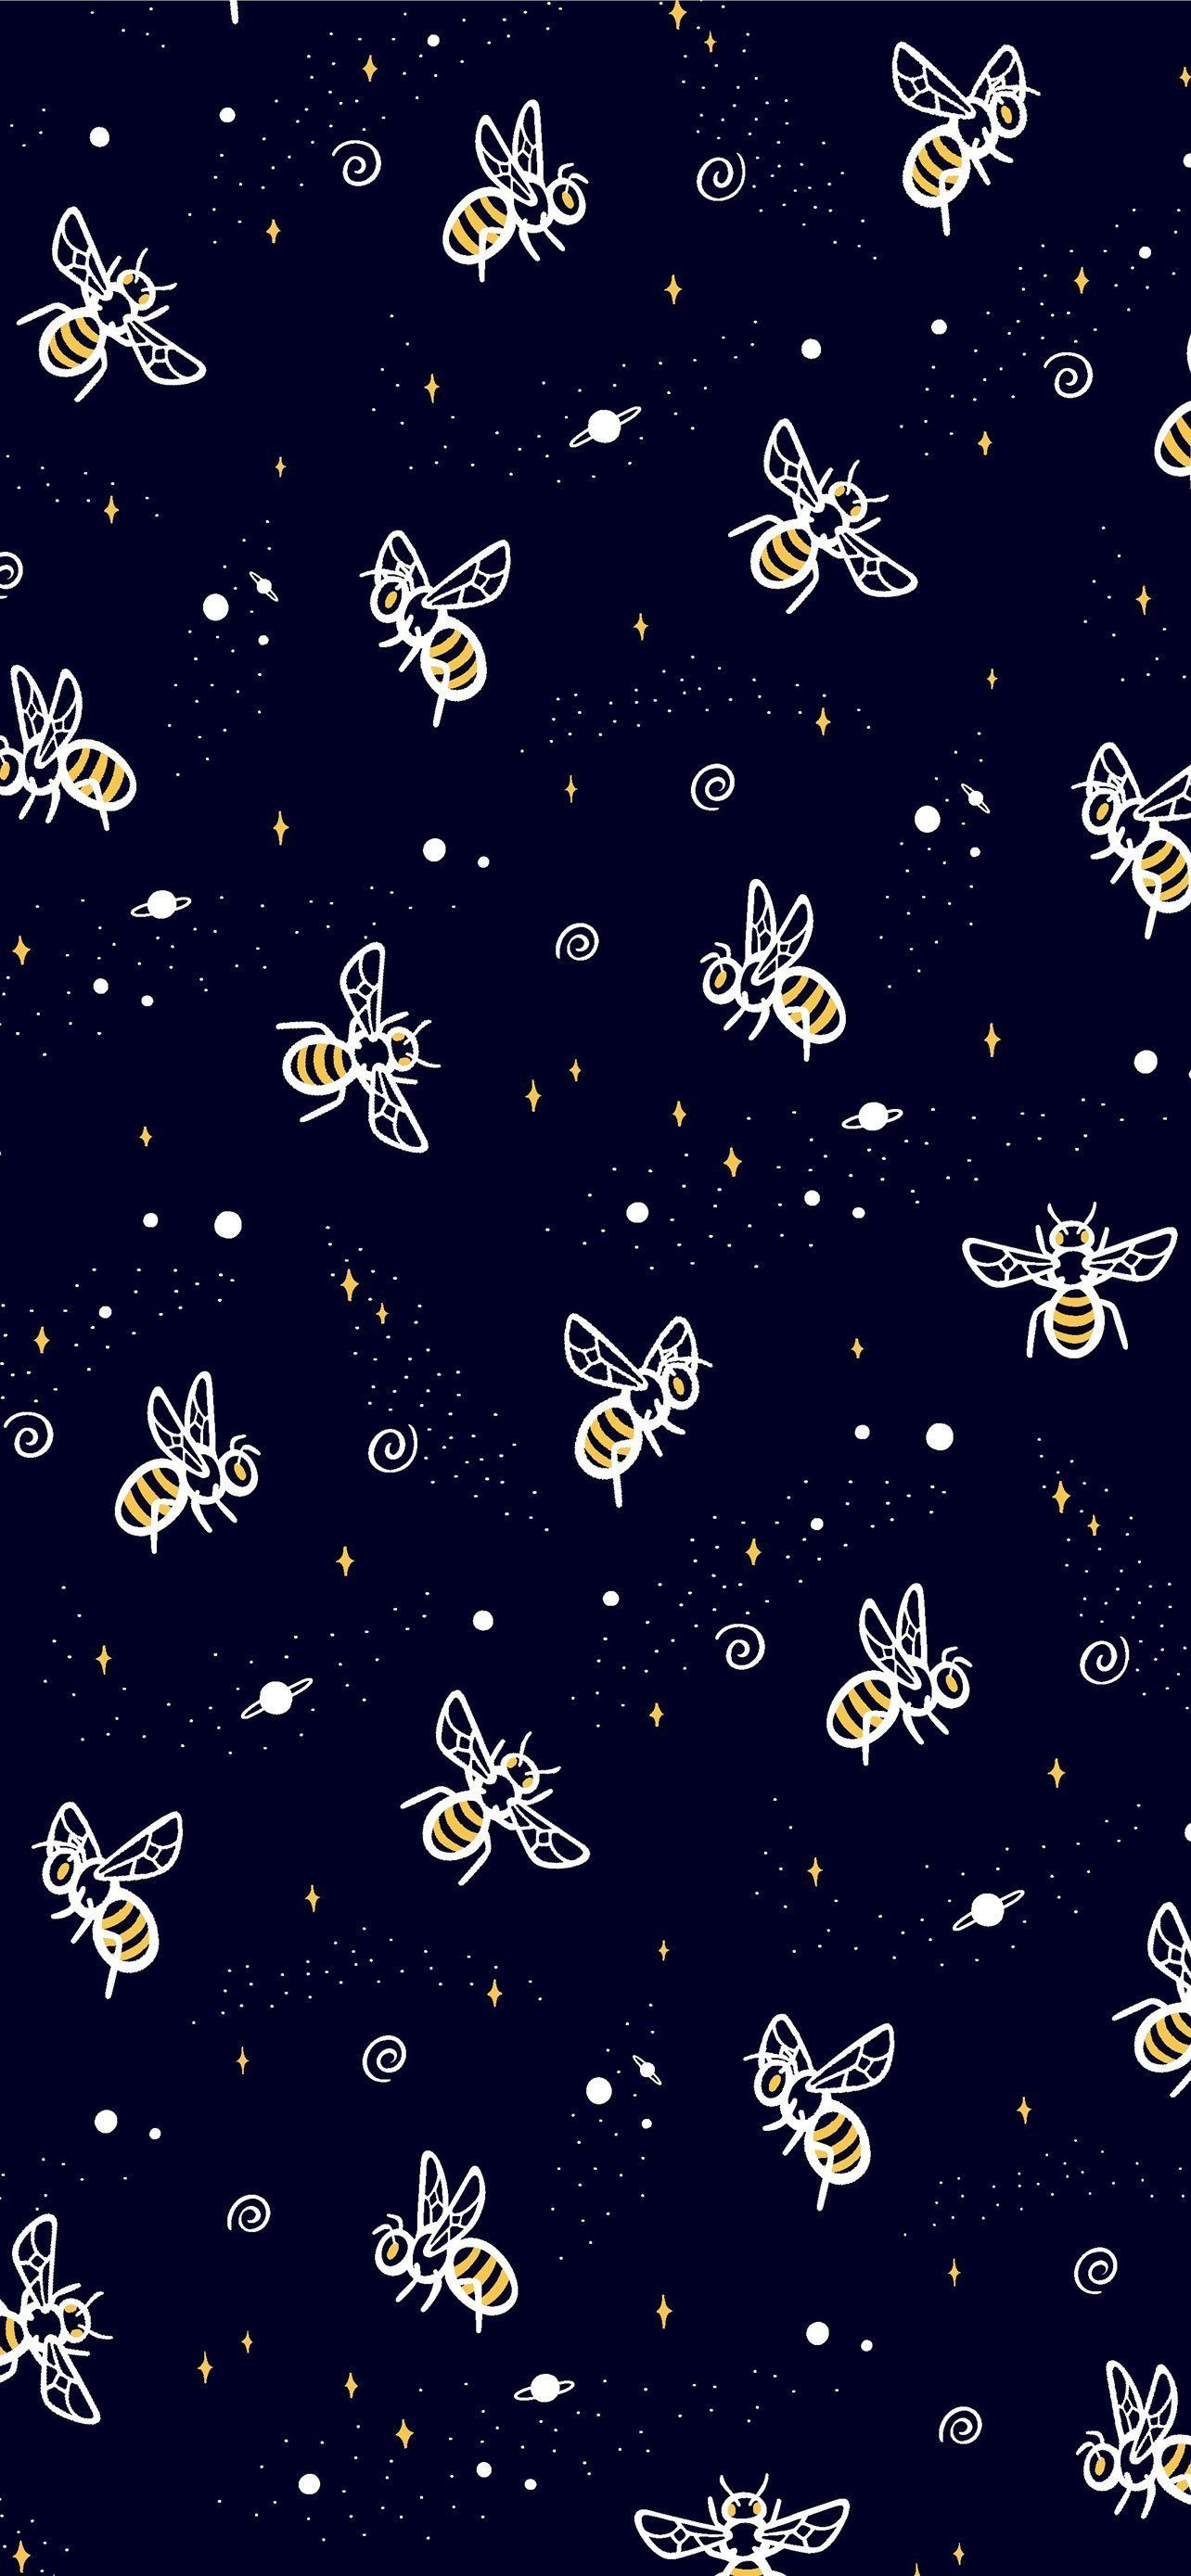 A pattern of bees and stars on blue - Bee